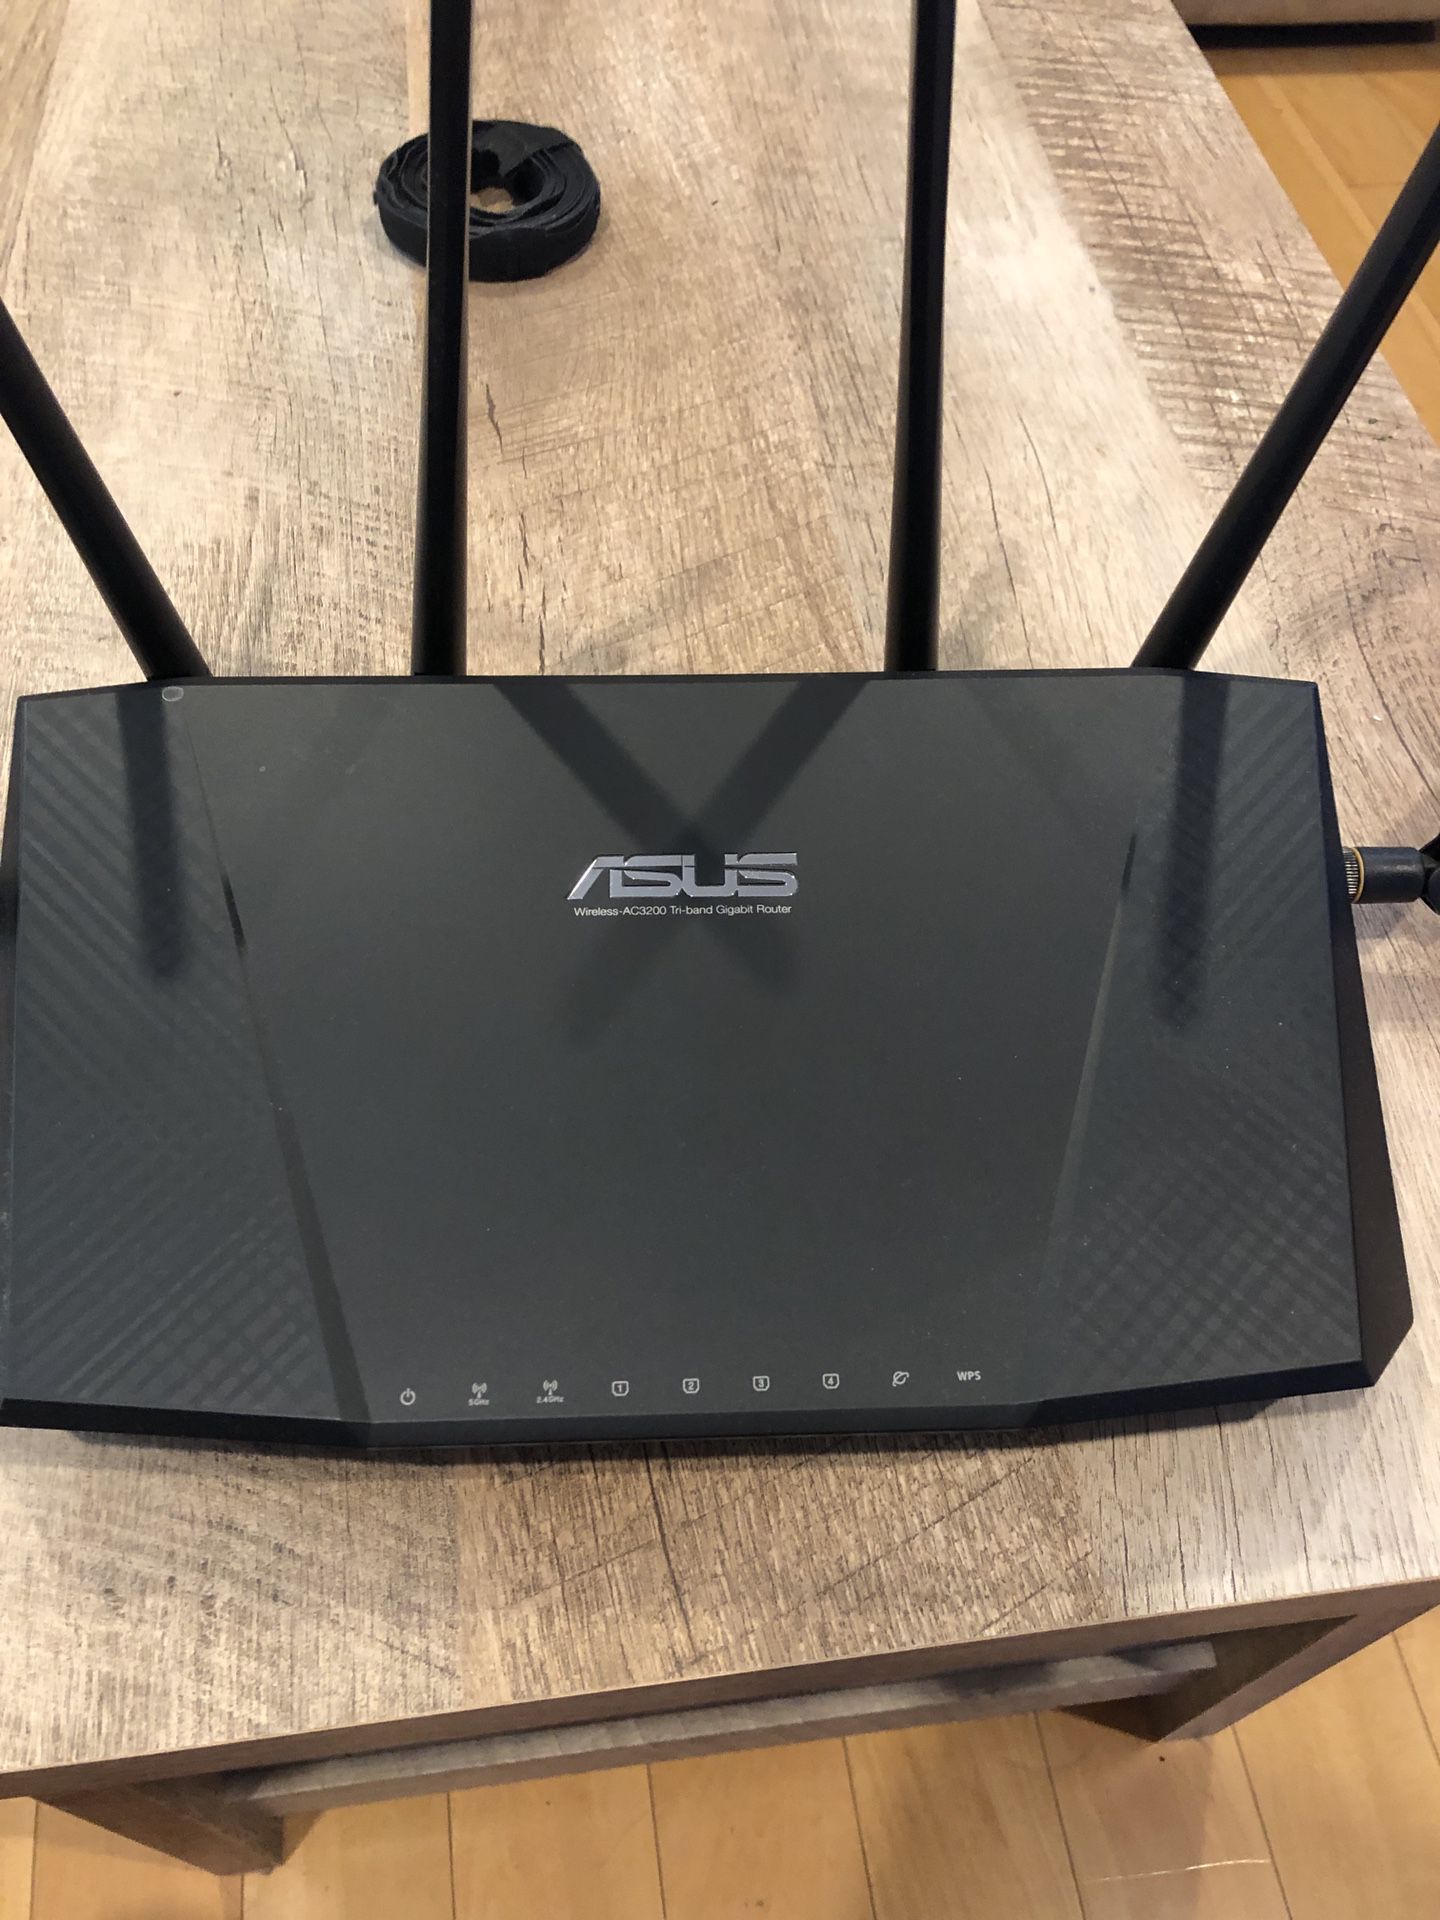 ASUS RT-AC3200 Tri-Band AC3200 Wireless Gigabit Router